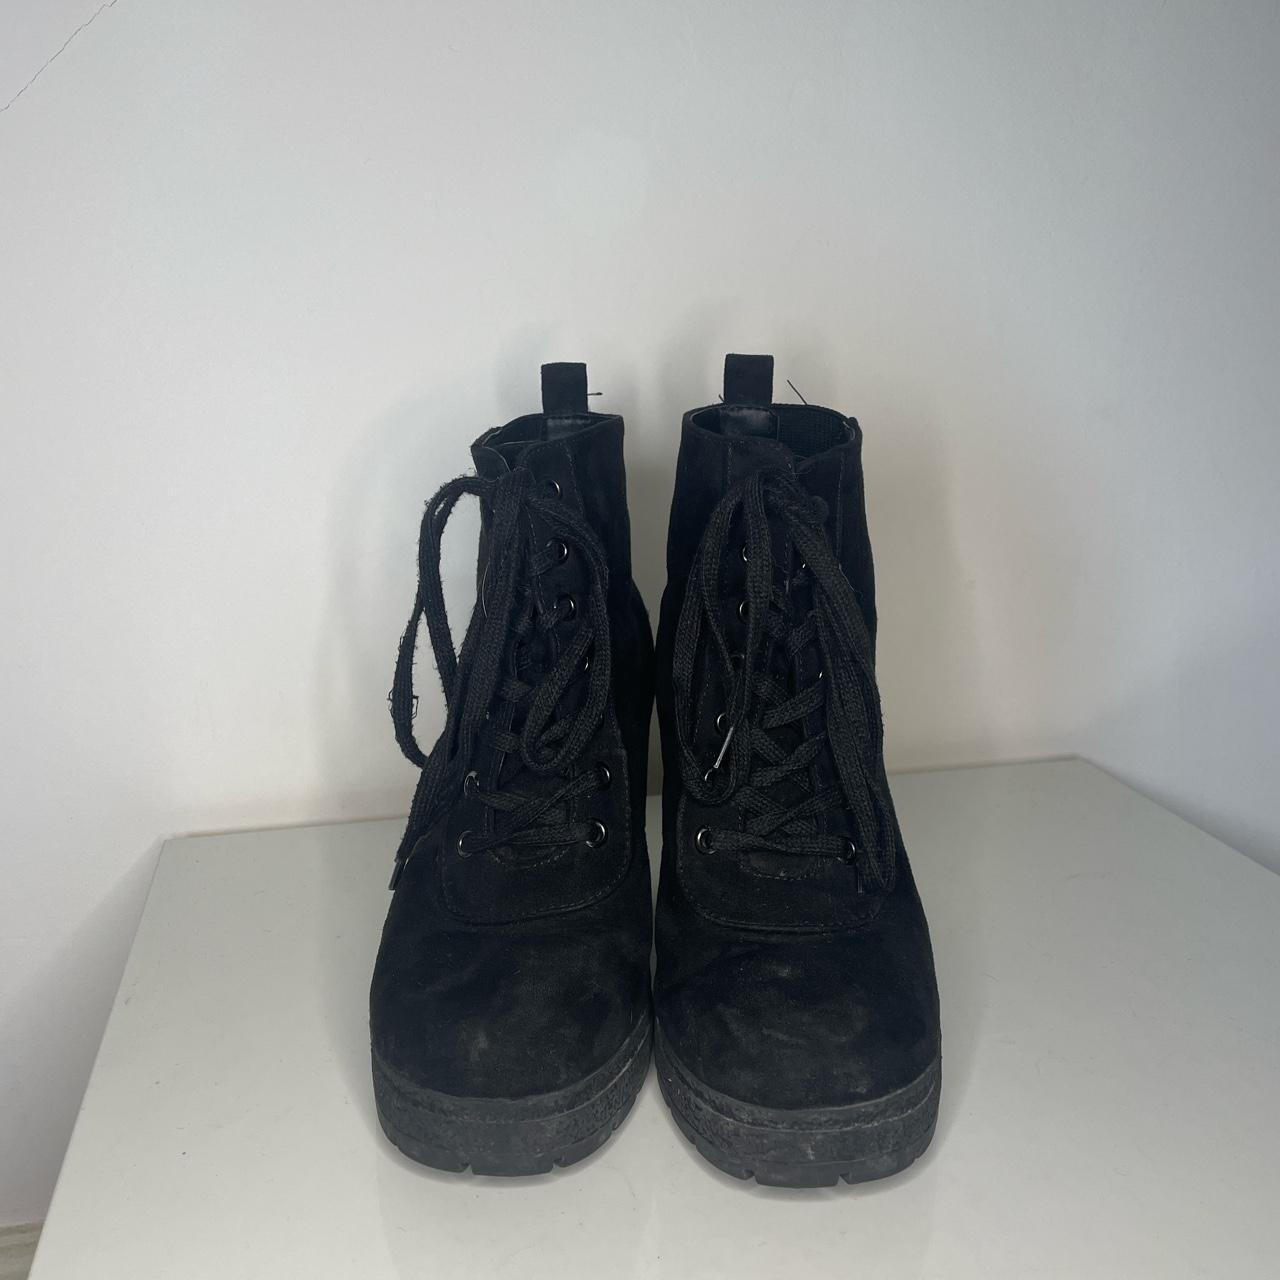 Size 6 black suede new look boots Will give the... - Depop